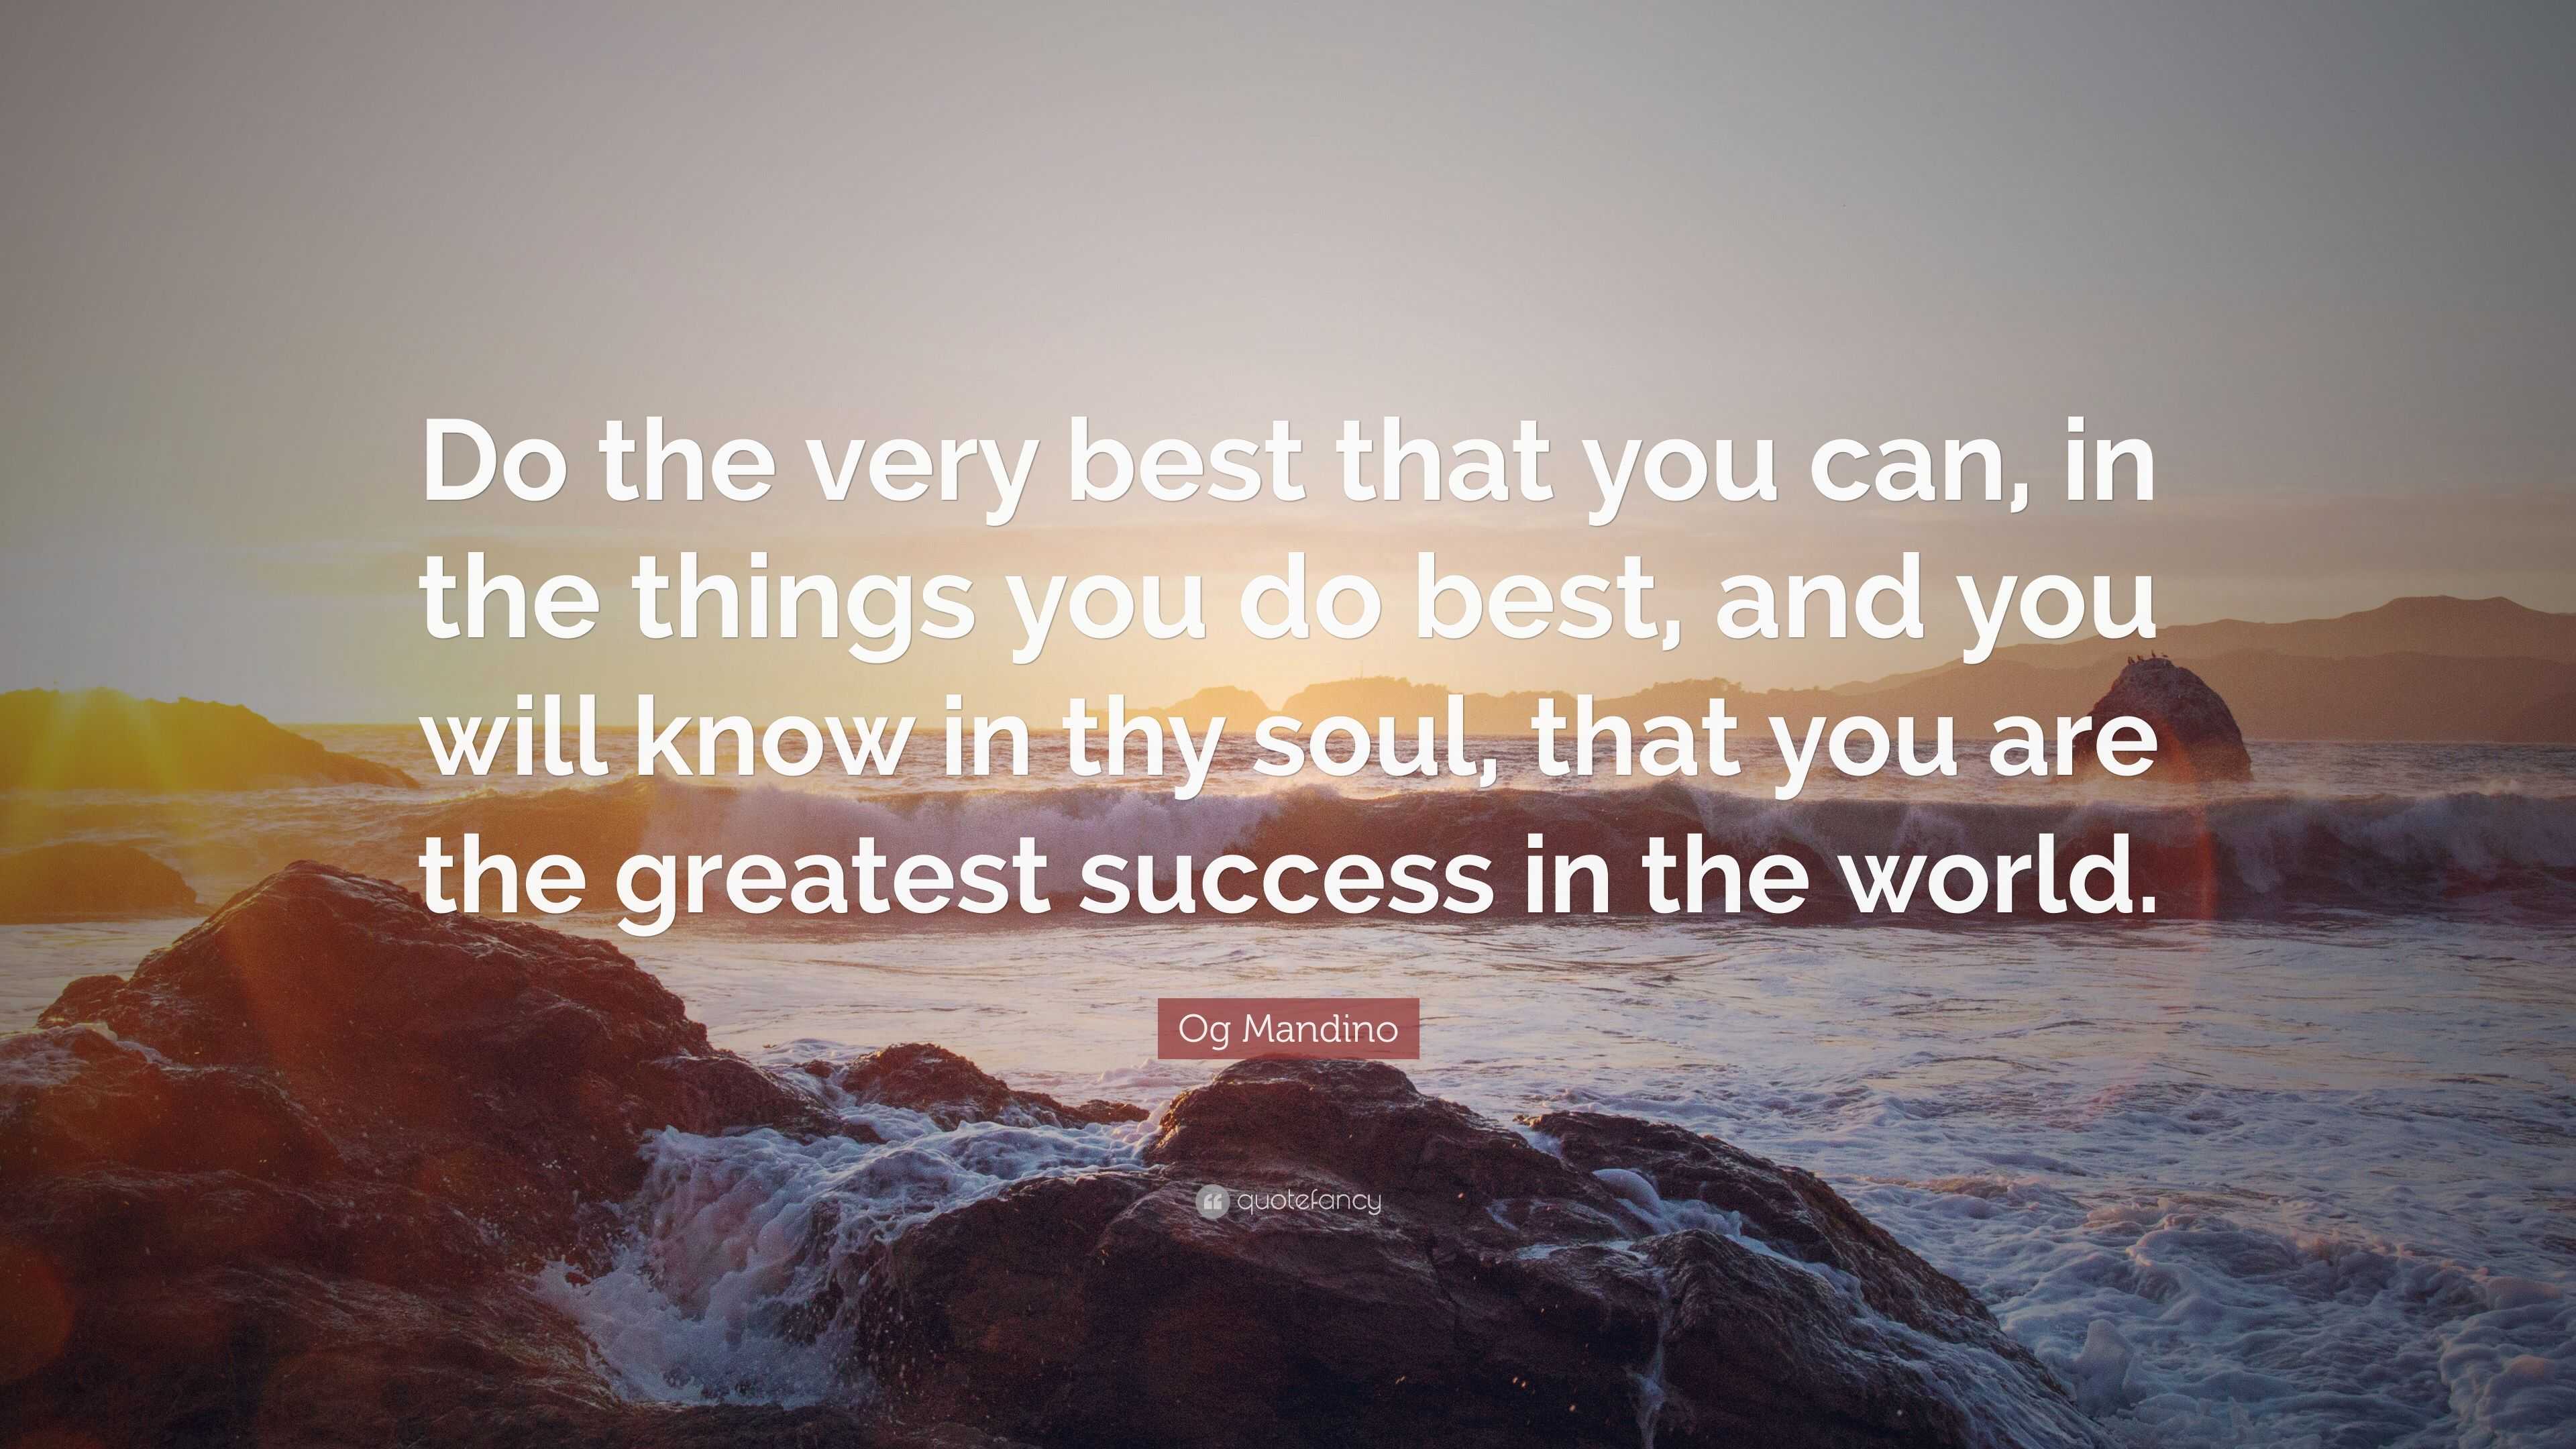 Og Mandino Quote: “Do the very best that you can, in the things you do ...